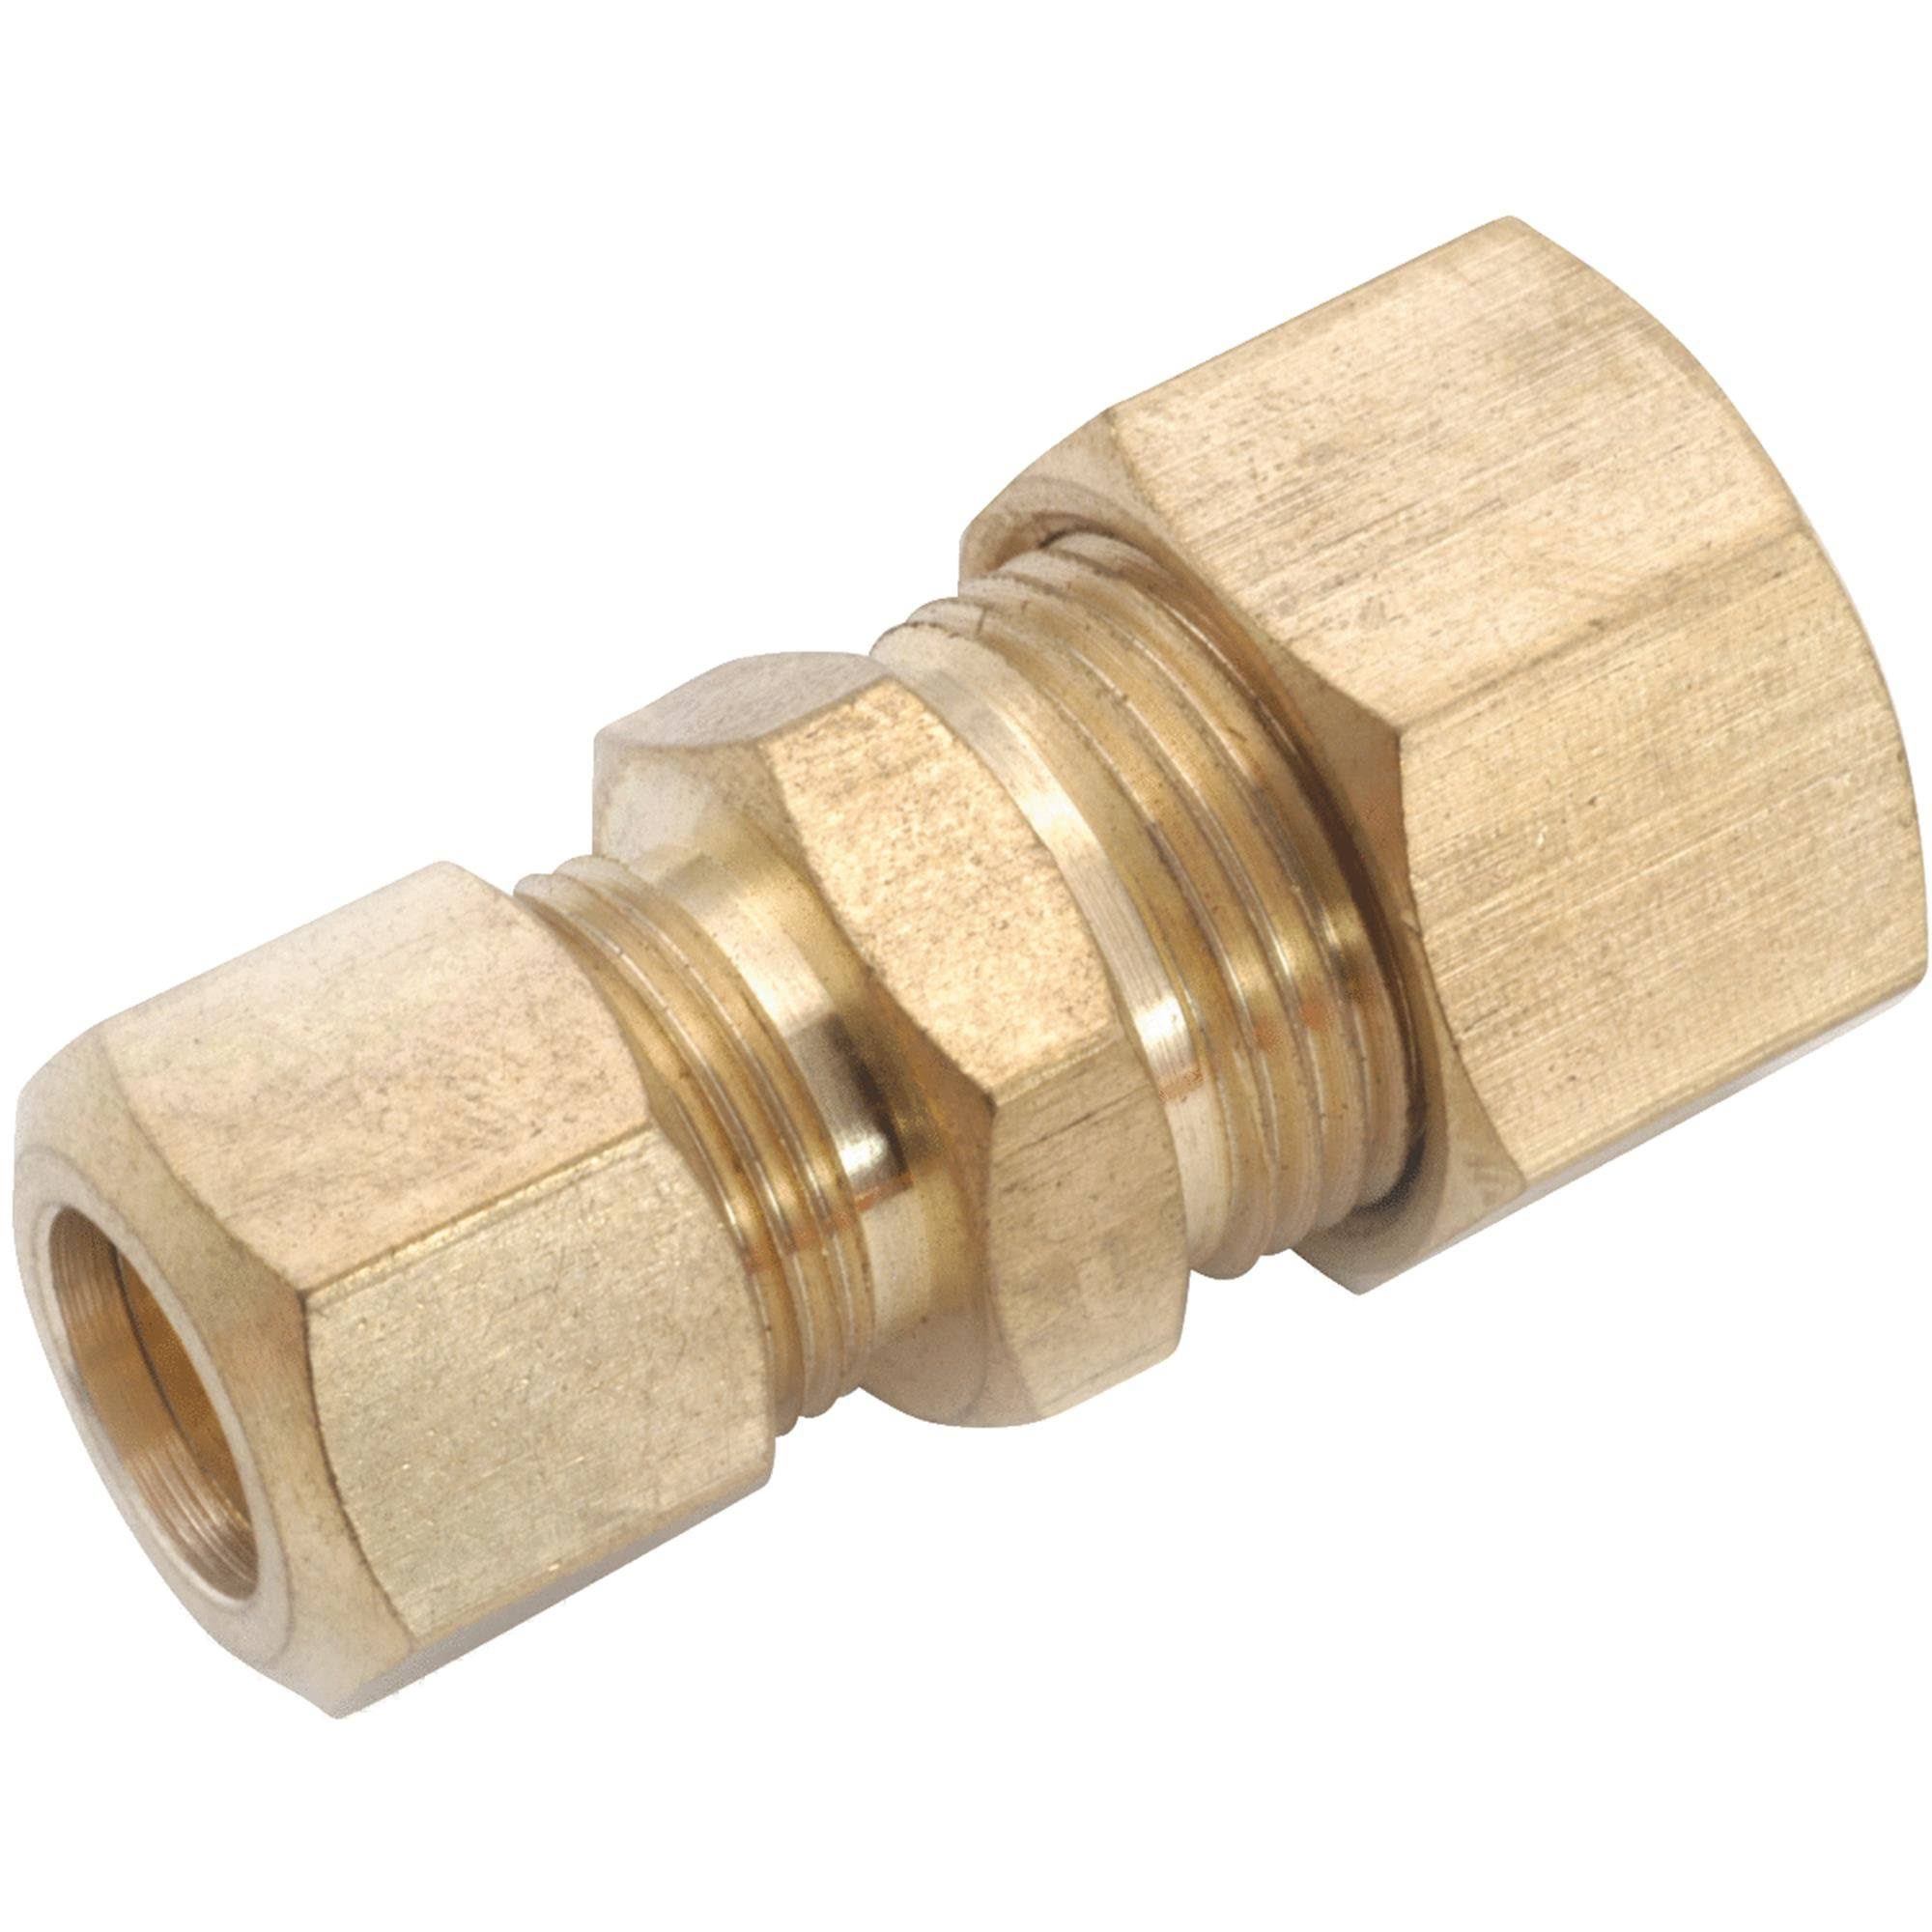 Anderson Metals 750082-0604 Low Lead Compression Union - Brass, 3/8" x 1/4"